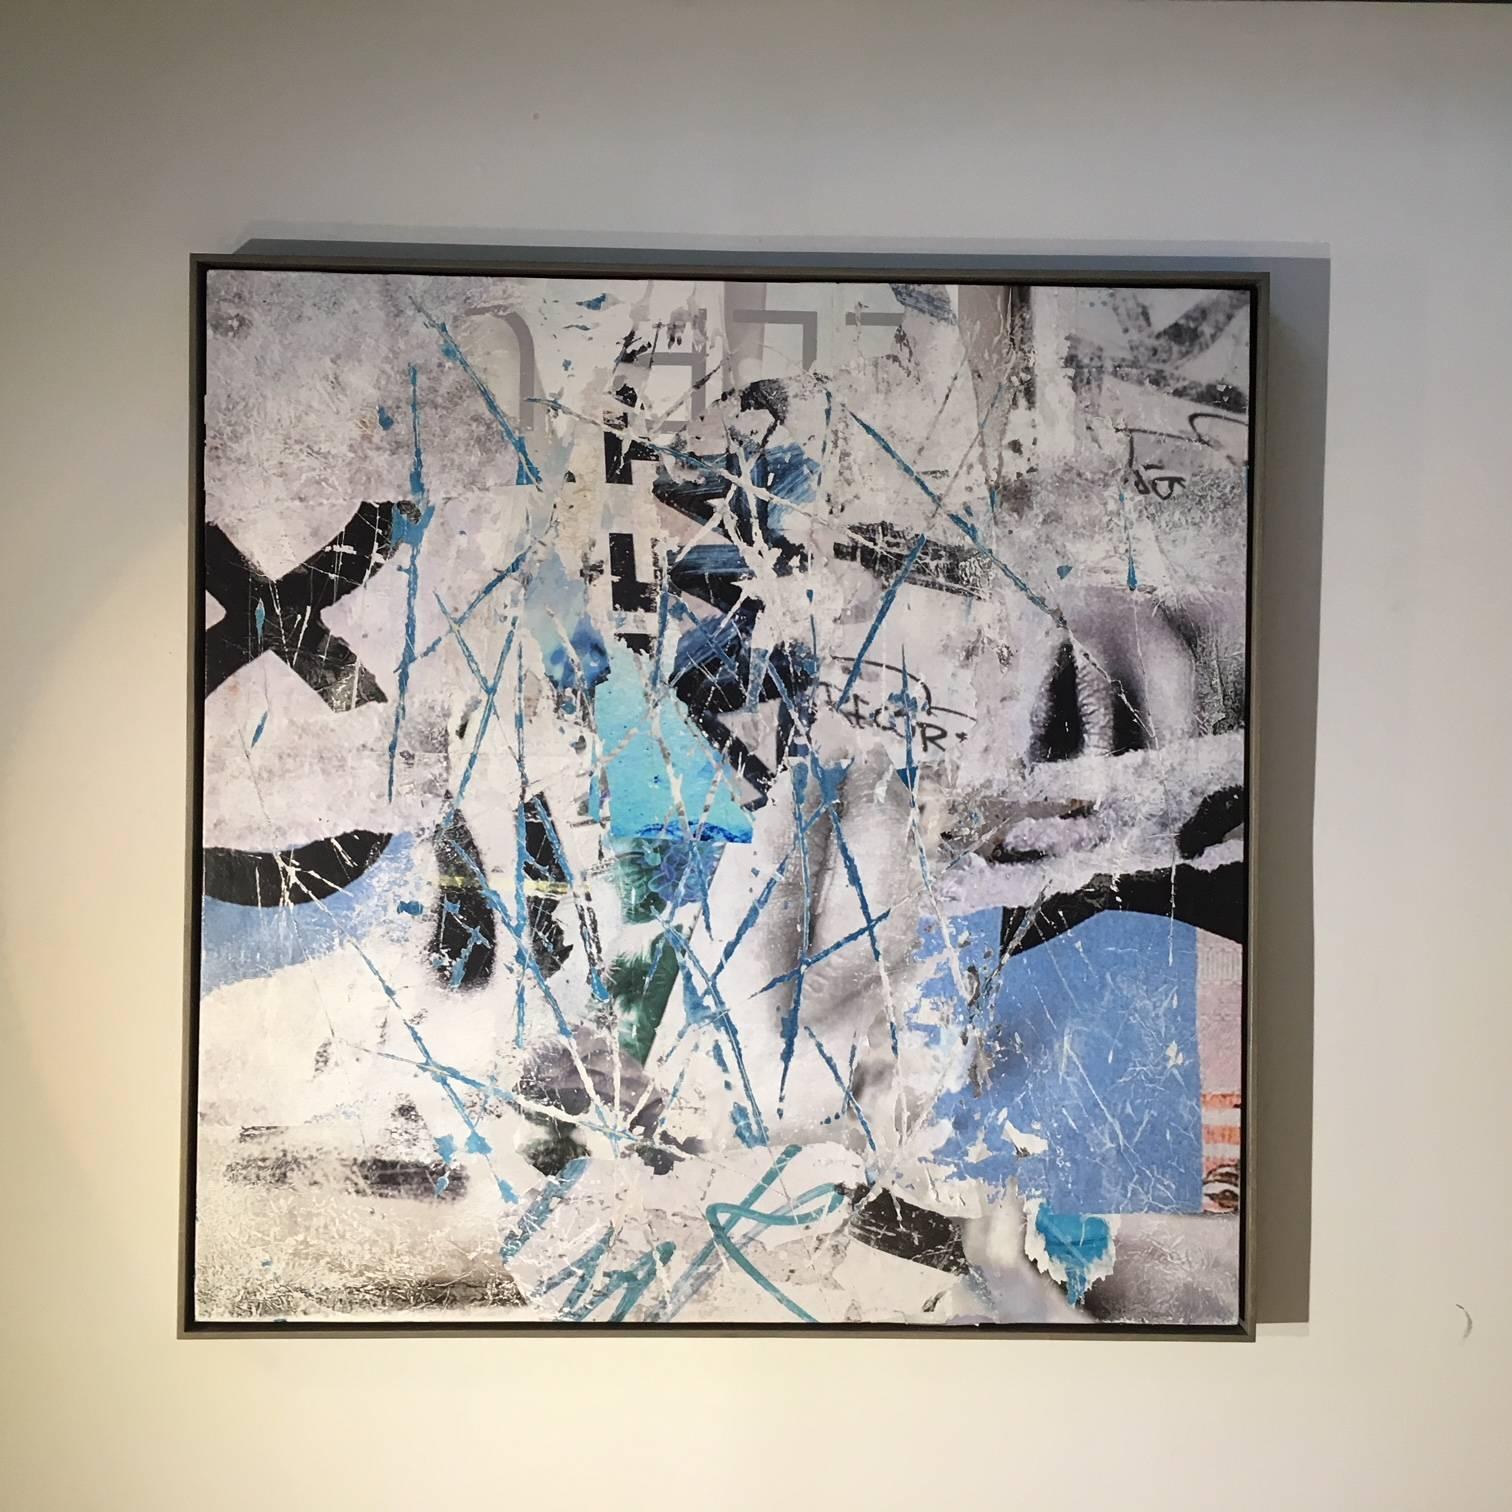 Cuts and Scrapes #1 - contemporary street art white and blue abstract painting - Gray Abstract Painting by David Fredrik Moussallem